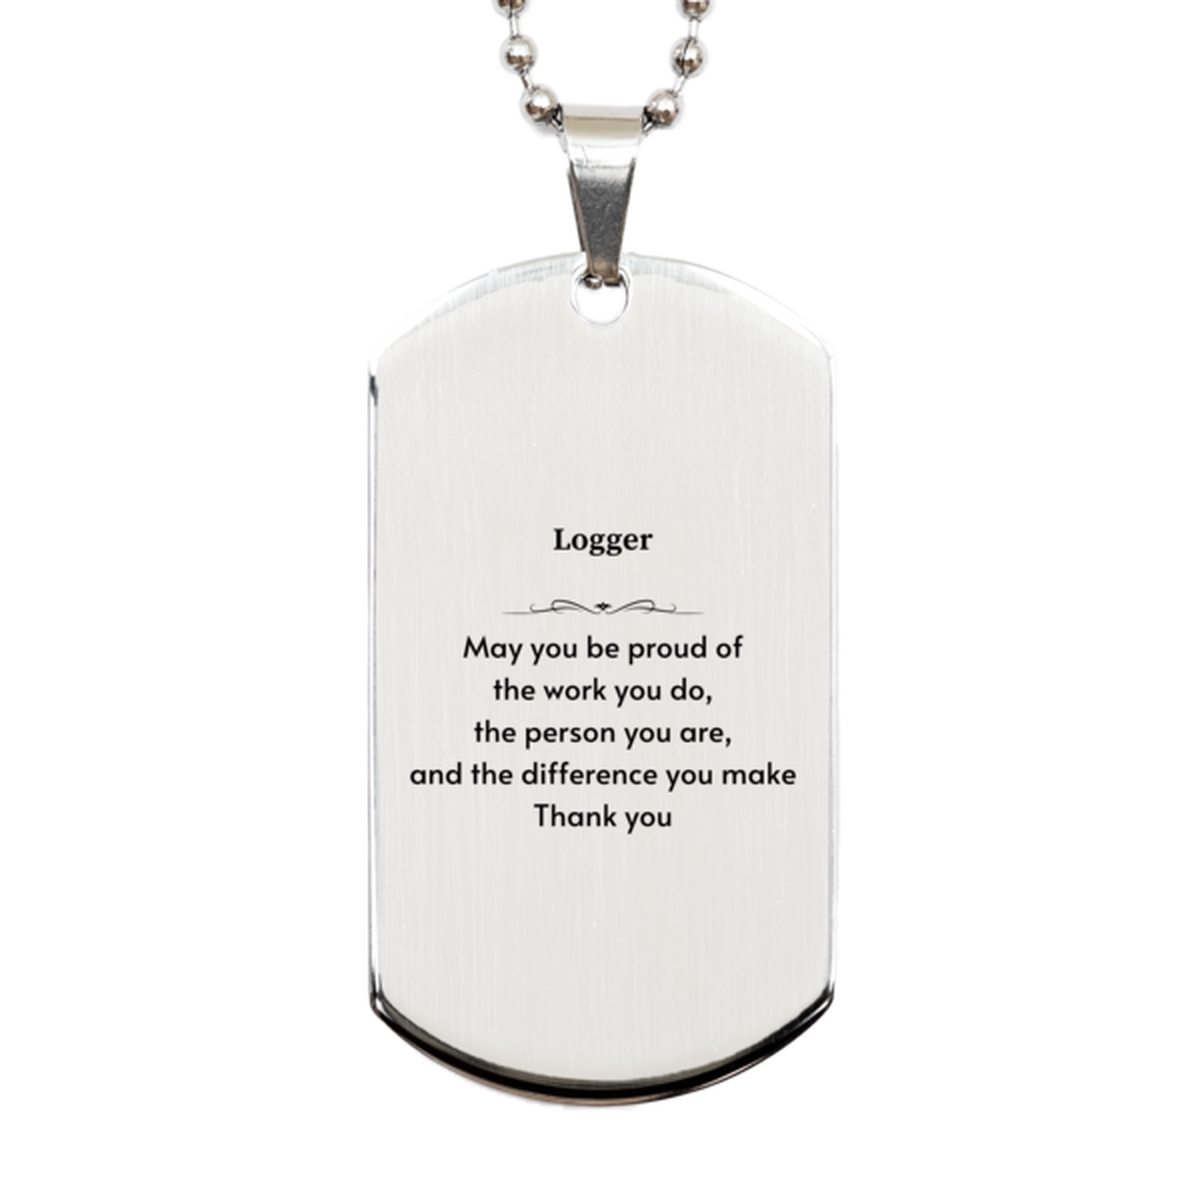 Heartwarming Silver Dog Tag Retirement Coworkers Gifts for Logger, Logger May You be proud of the work you do, the person you are Gifts for Boss Men Women Friends